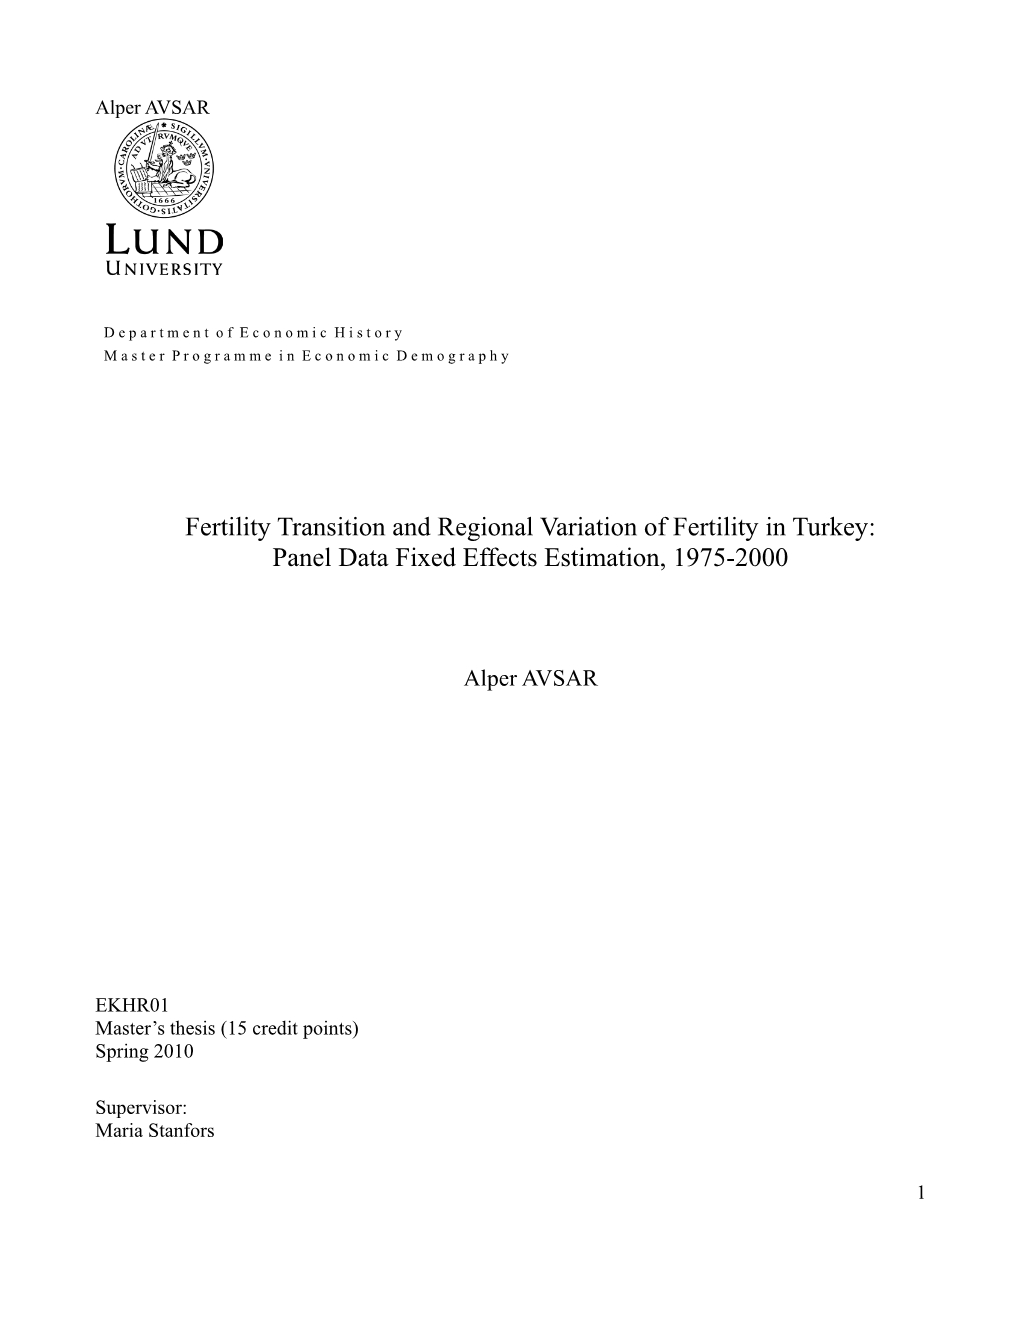 Fertility Transition and Regional Variation of Fertility in Turkey: Panel Data Fixed Effects